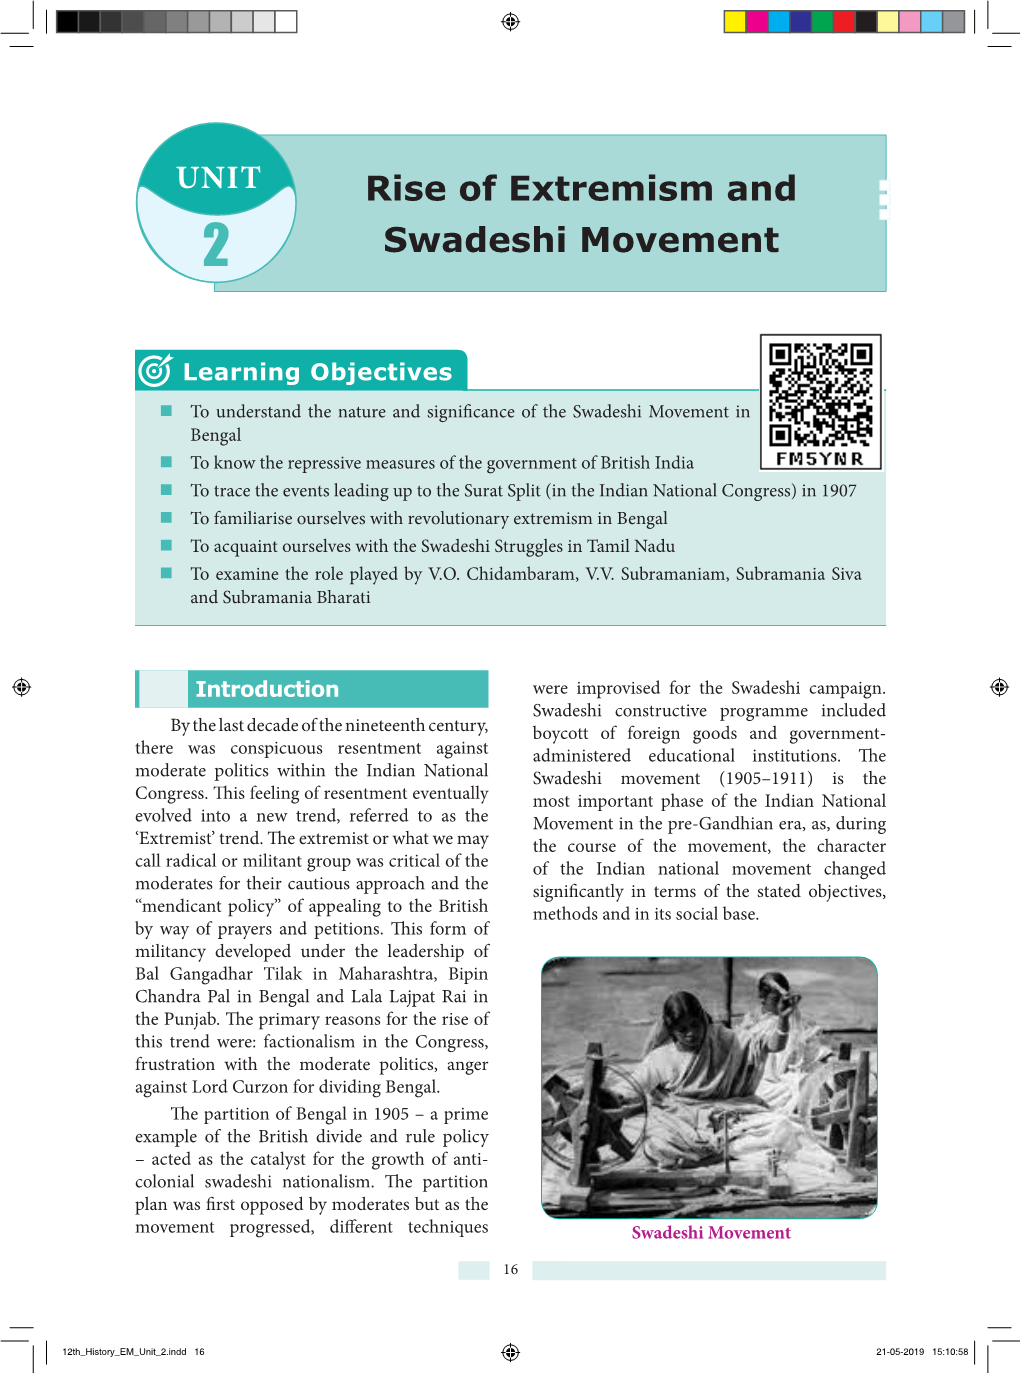 Rise of Extremism and Swadeshi Movement